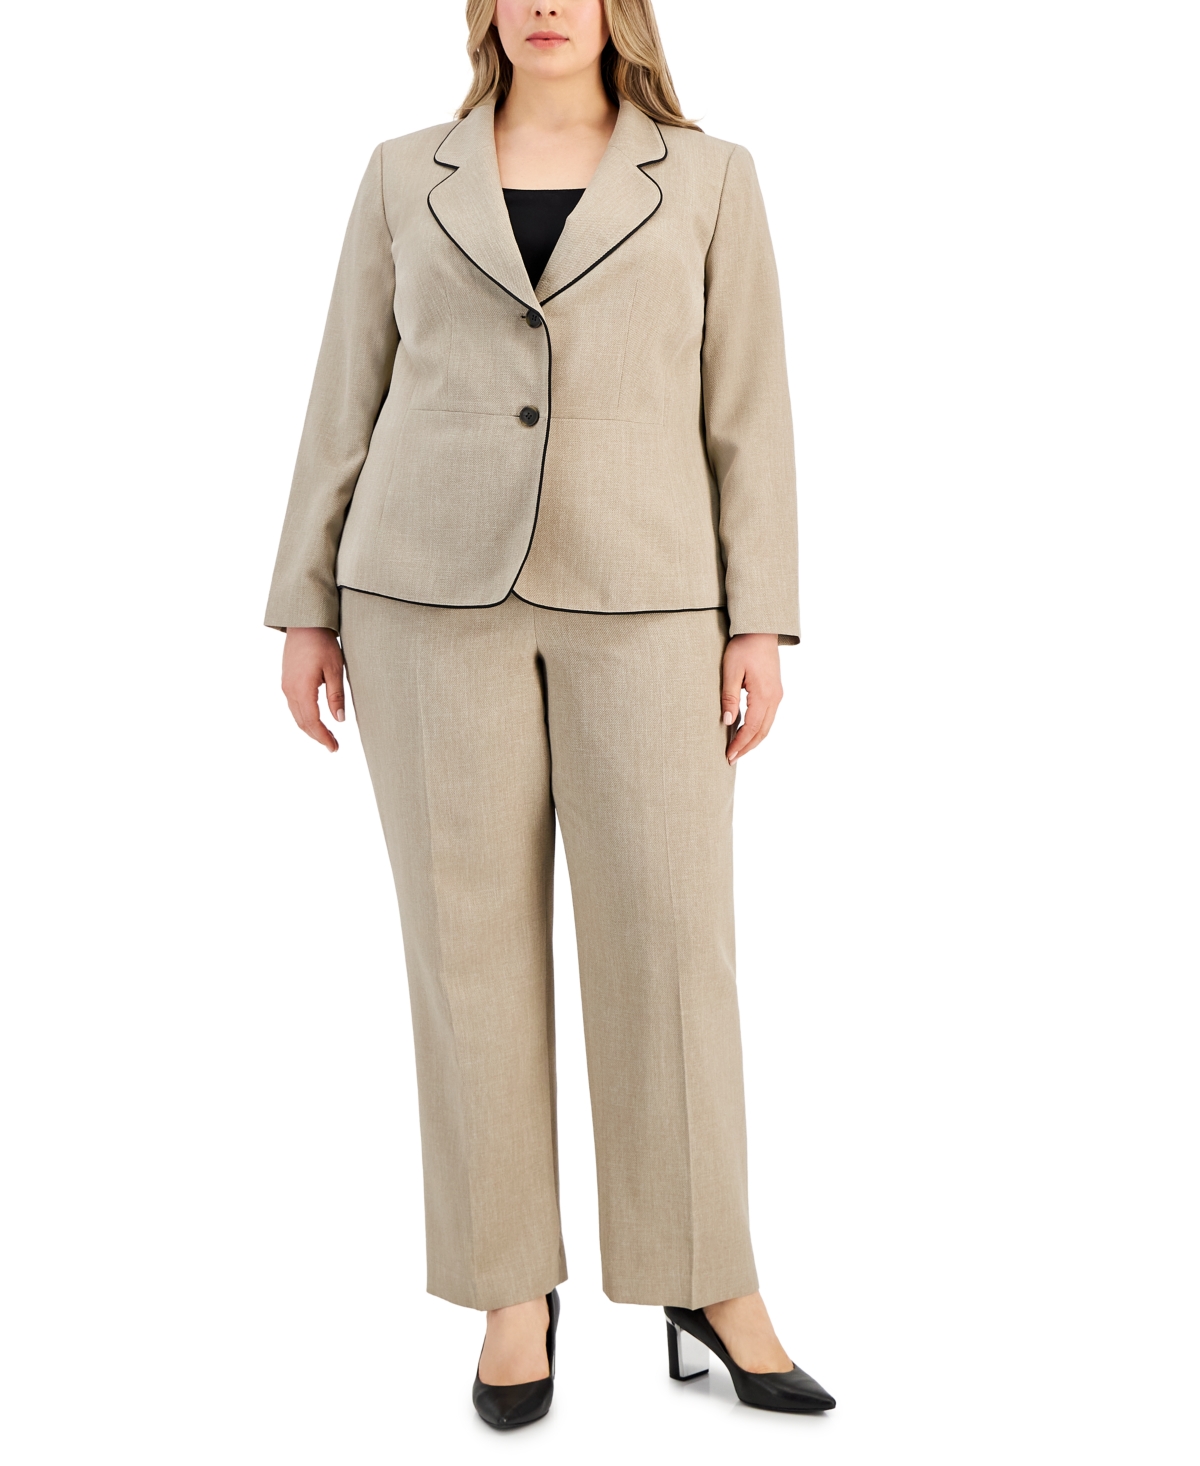 Le Suit Women's Framed Twill Two-button Pantsuit, Regular And Petite Sizes In Desert,black